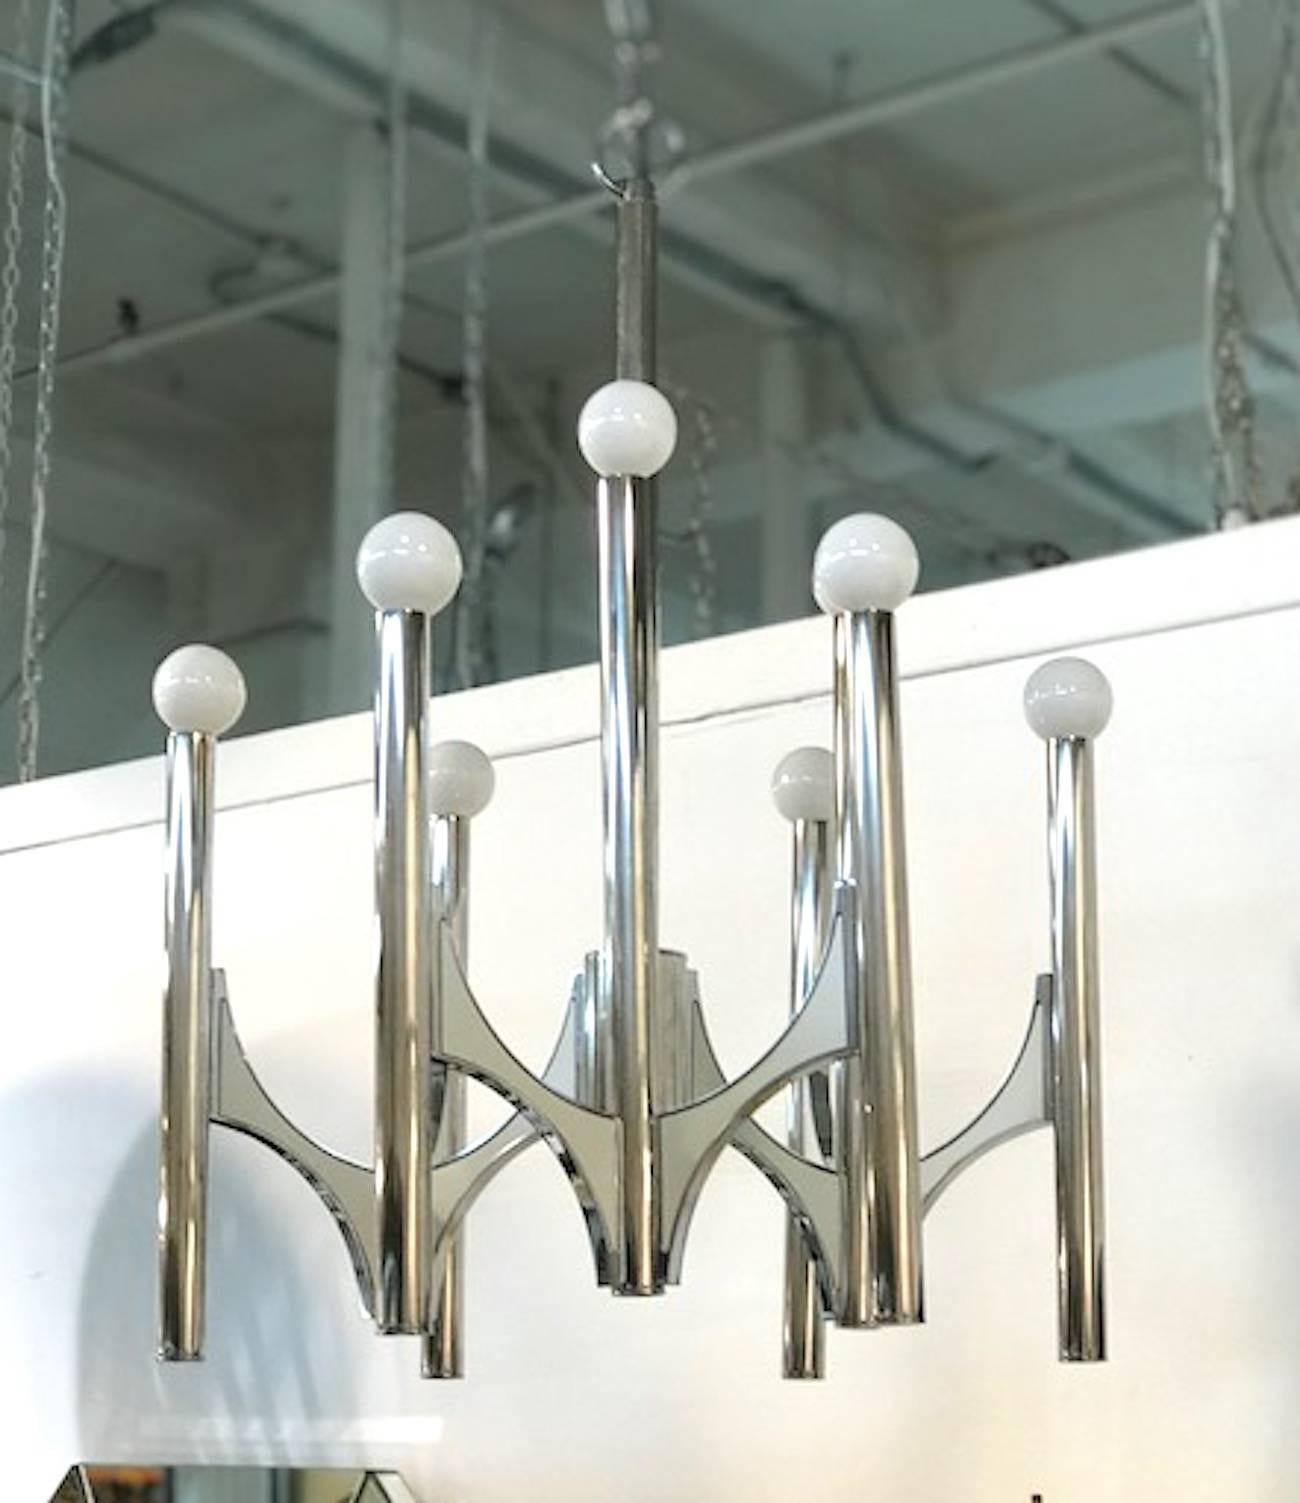 This chandelier is one of a group. There is a matching small three-light and large twelve-light version available (See last photo). It was produced by the long time lighting manufacturer Sciolari of Italy, circa 1960-1970. The family company opened